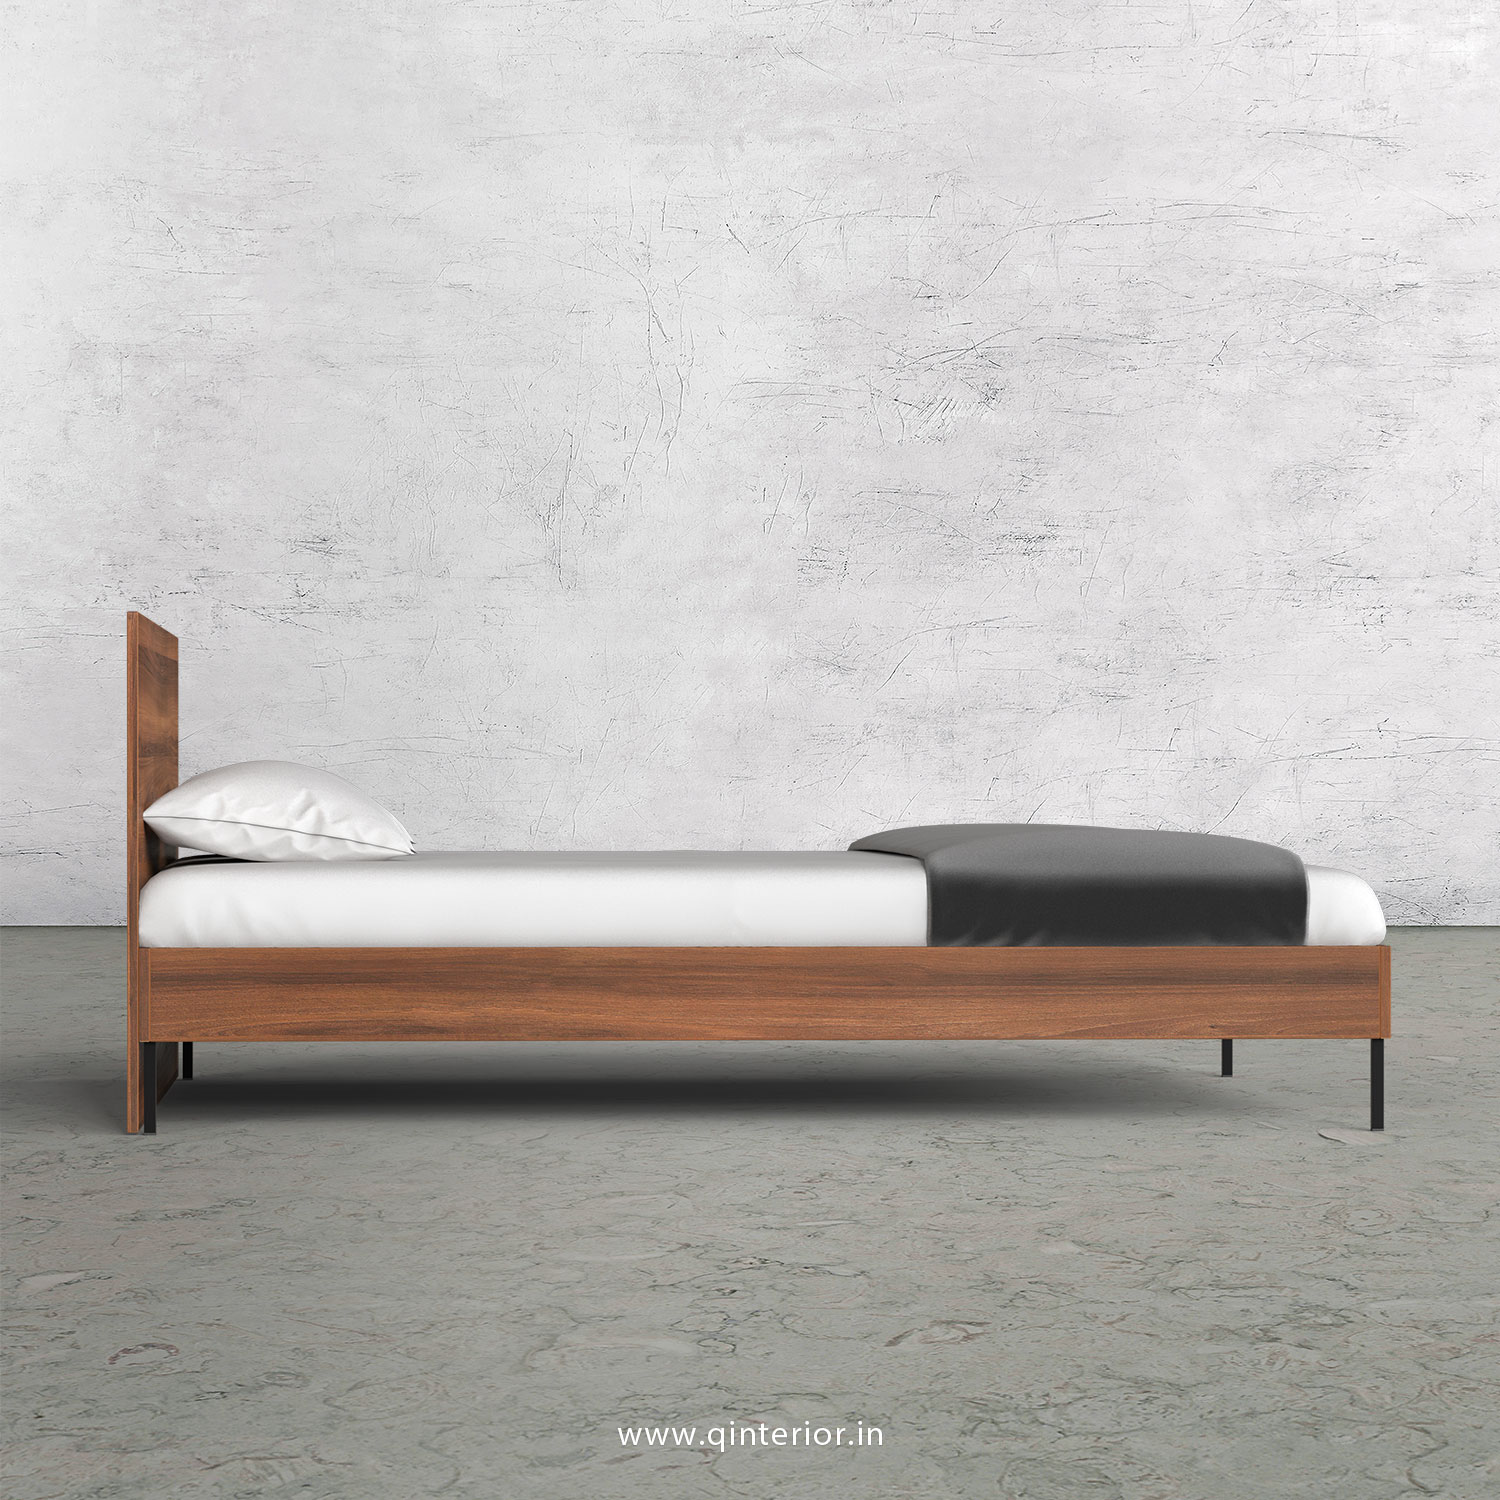 Stable Single Bed in Teak Finish - SBD105 C3